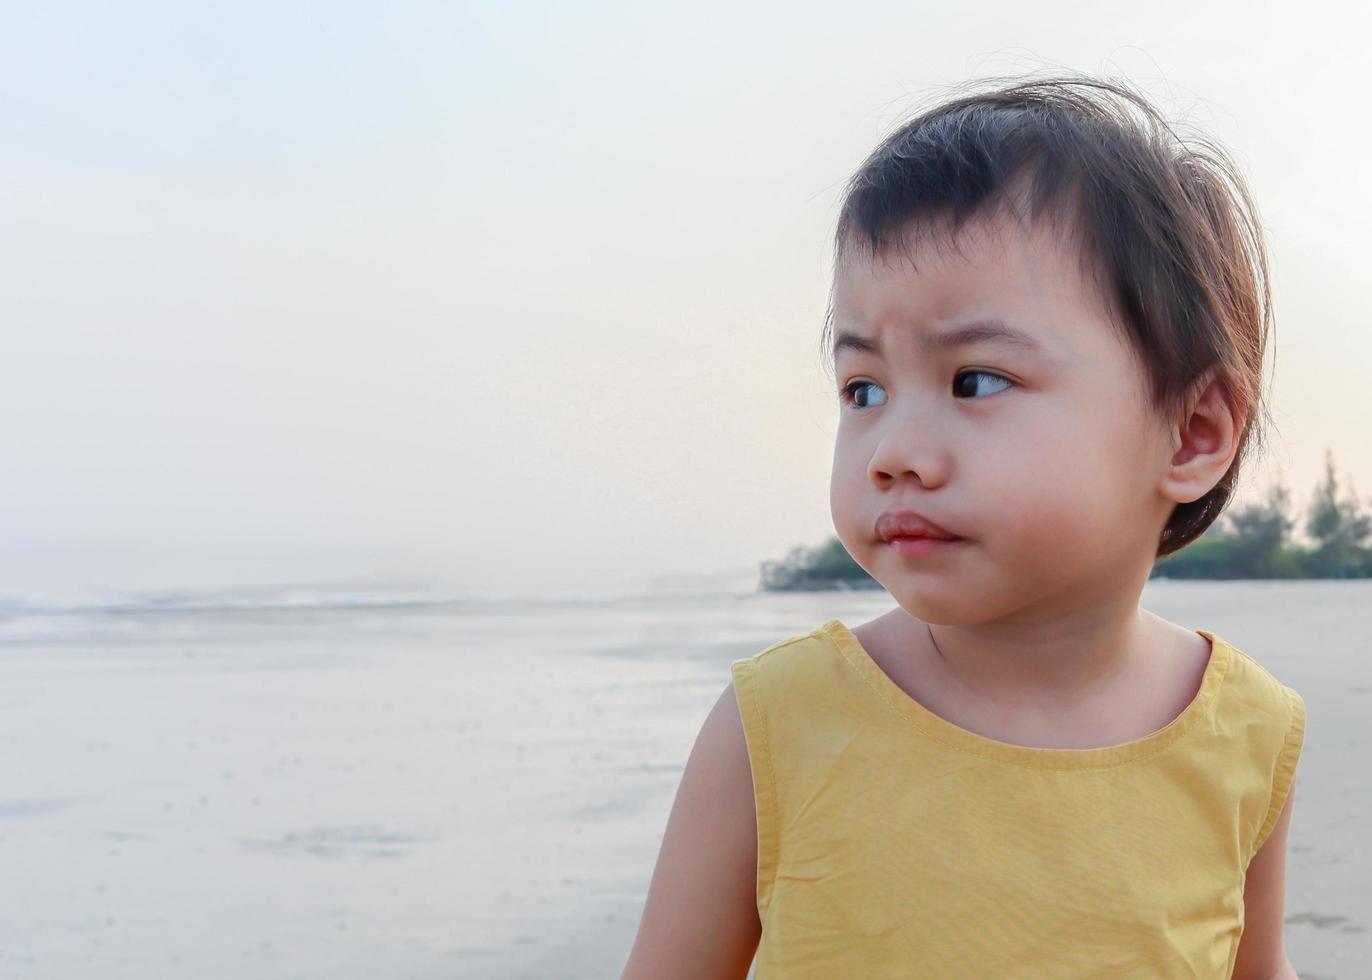 Asian girl standing with worried expression on the beach. photo